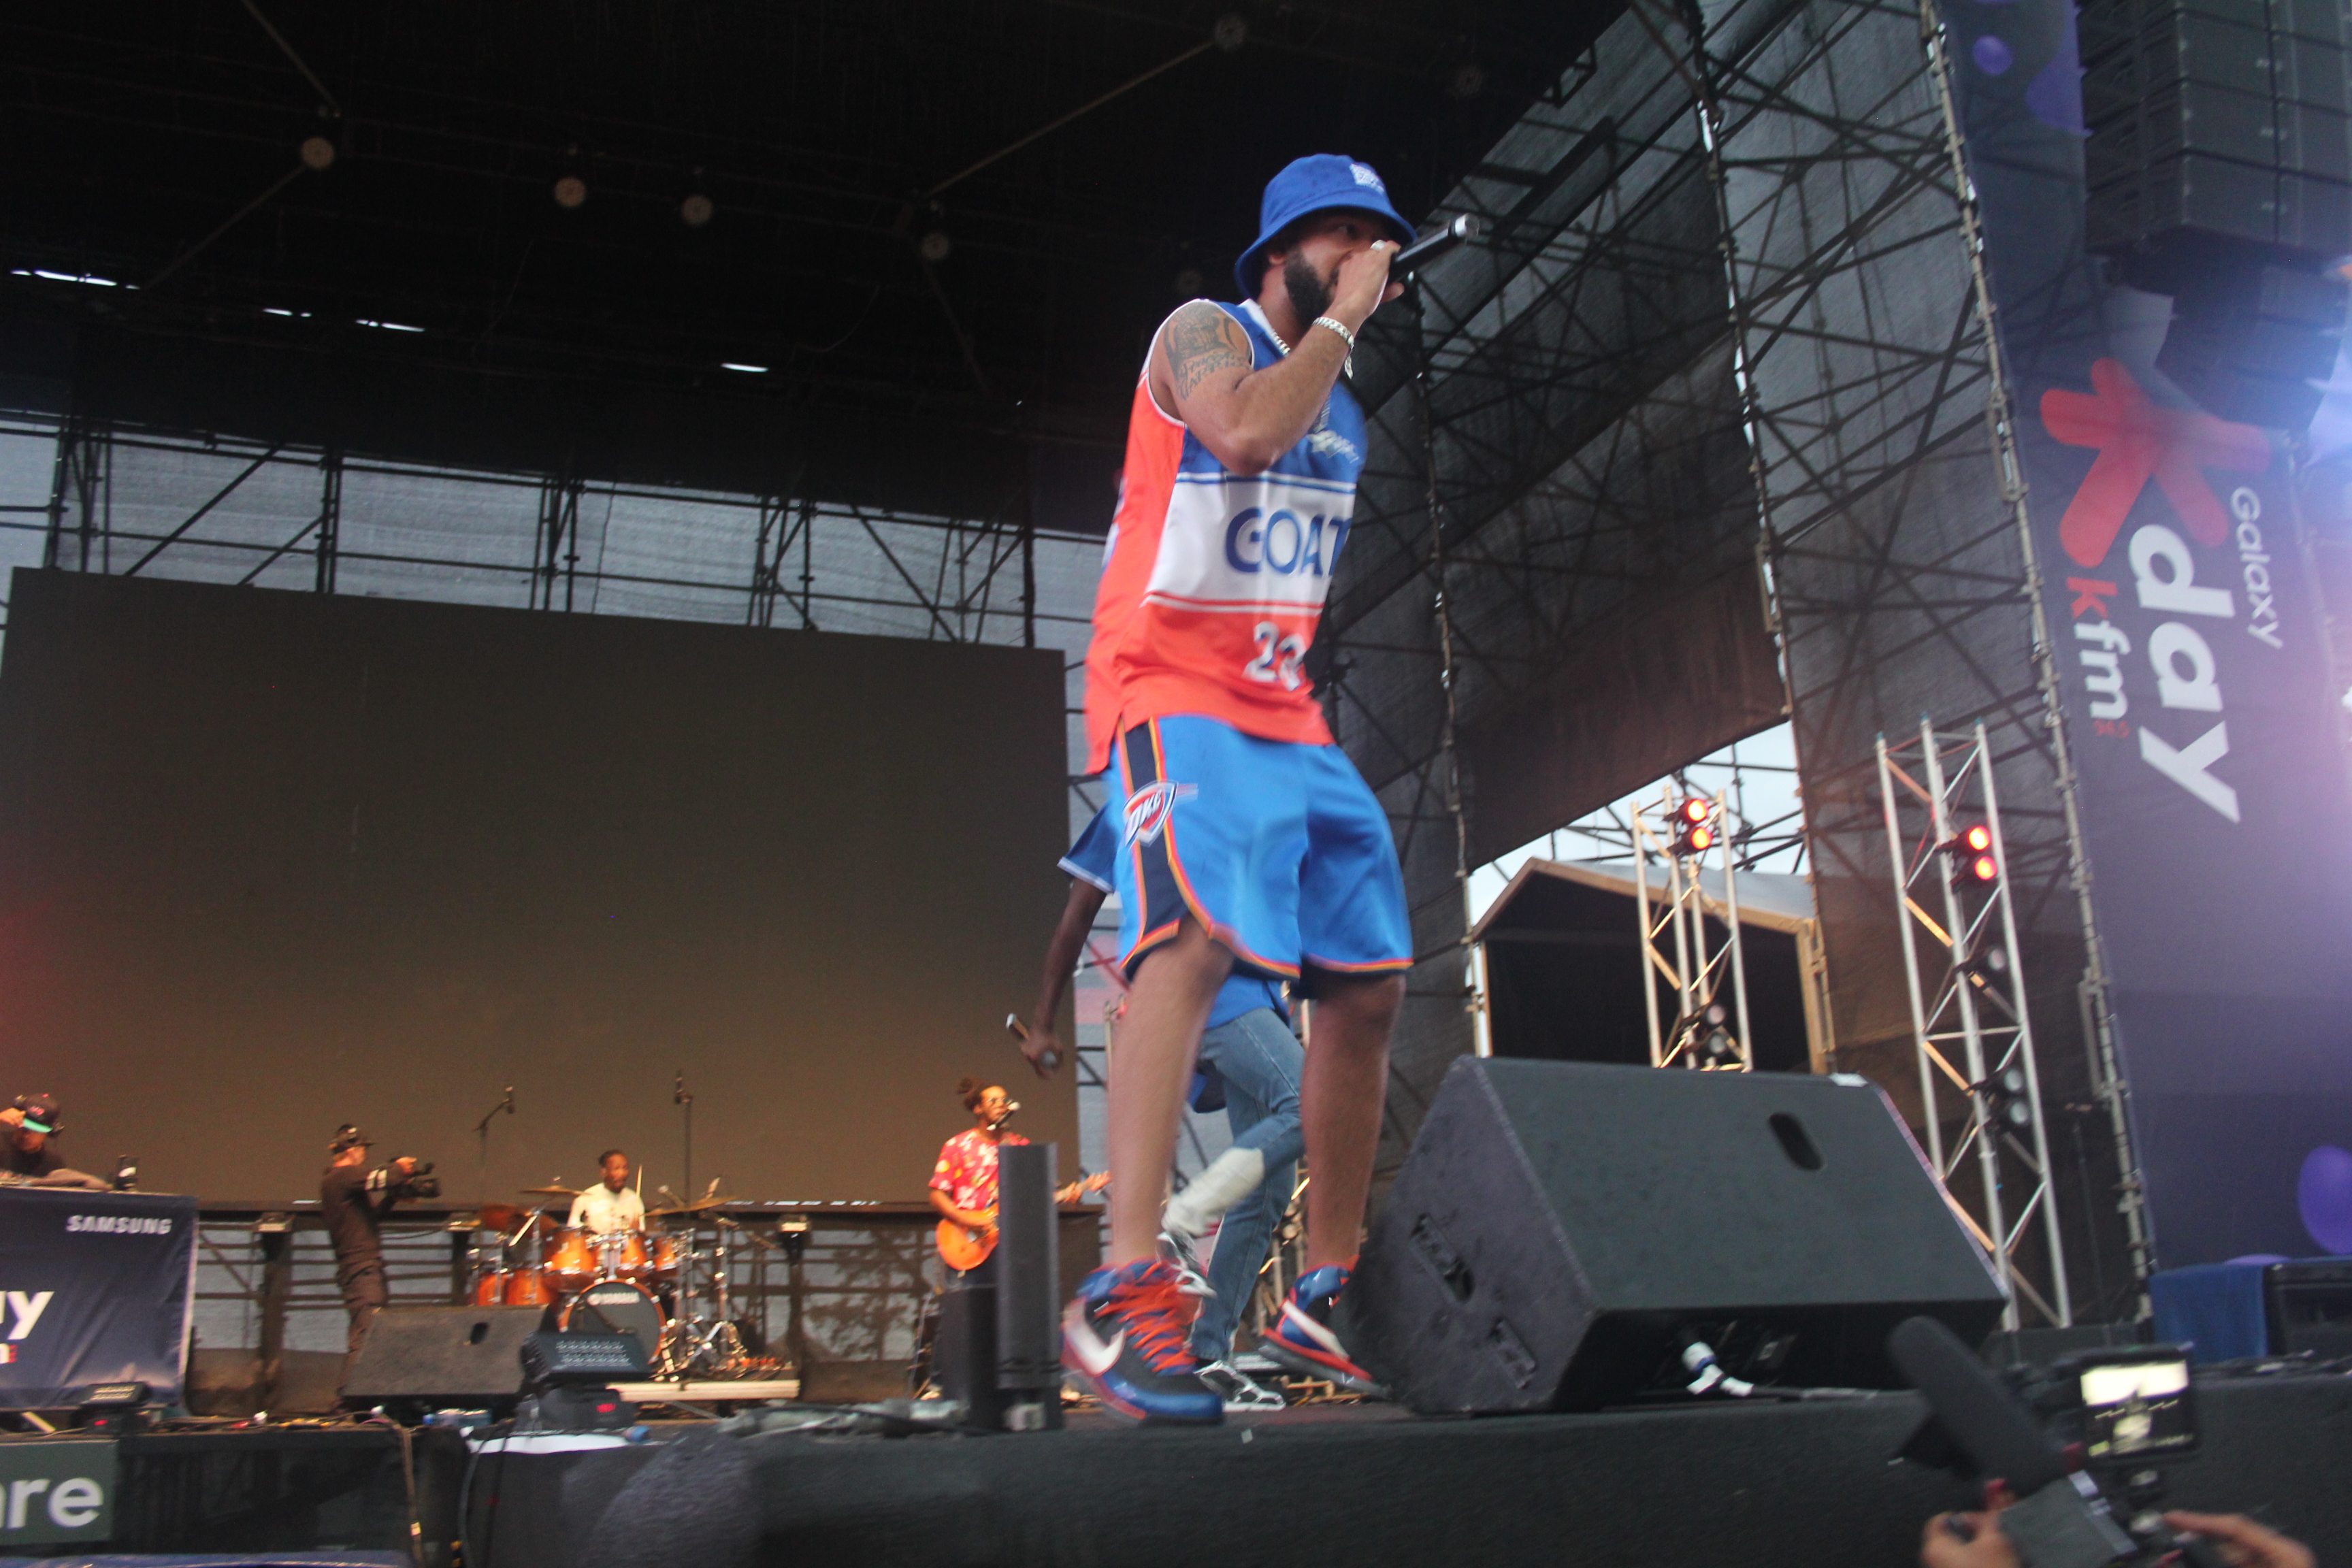 YoungstaCPT in action, refusing to let the rain stop the showat the Galaxy KDay Festival. Image: Oren-Andrew Wentzel